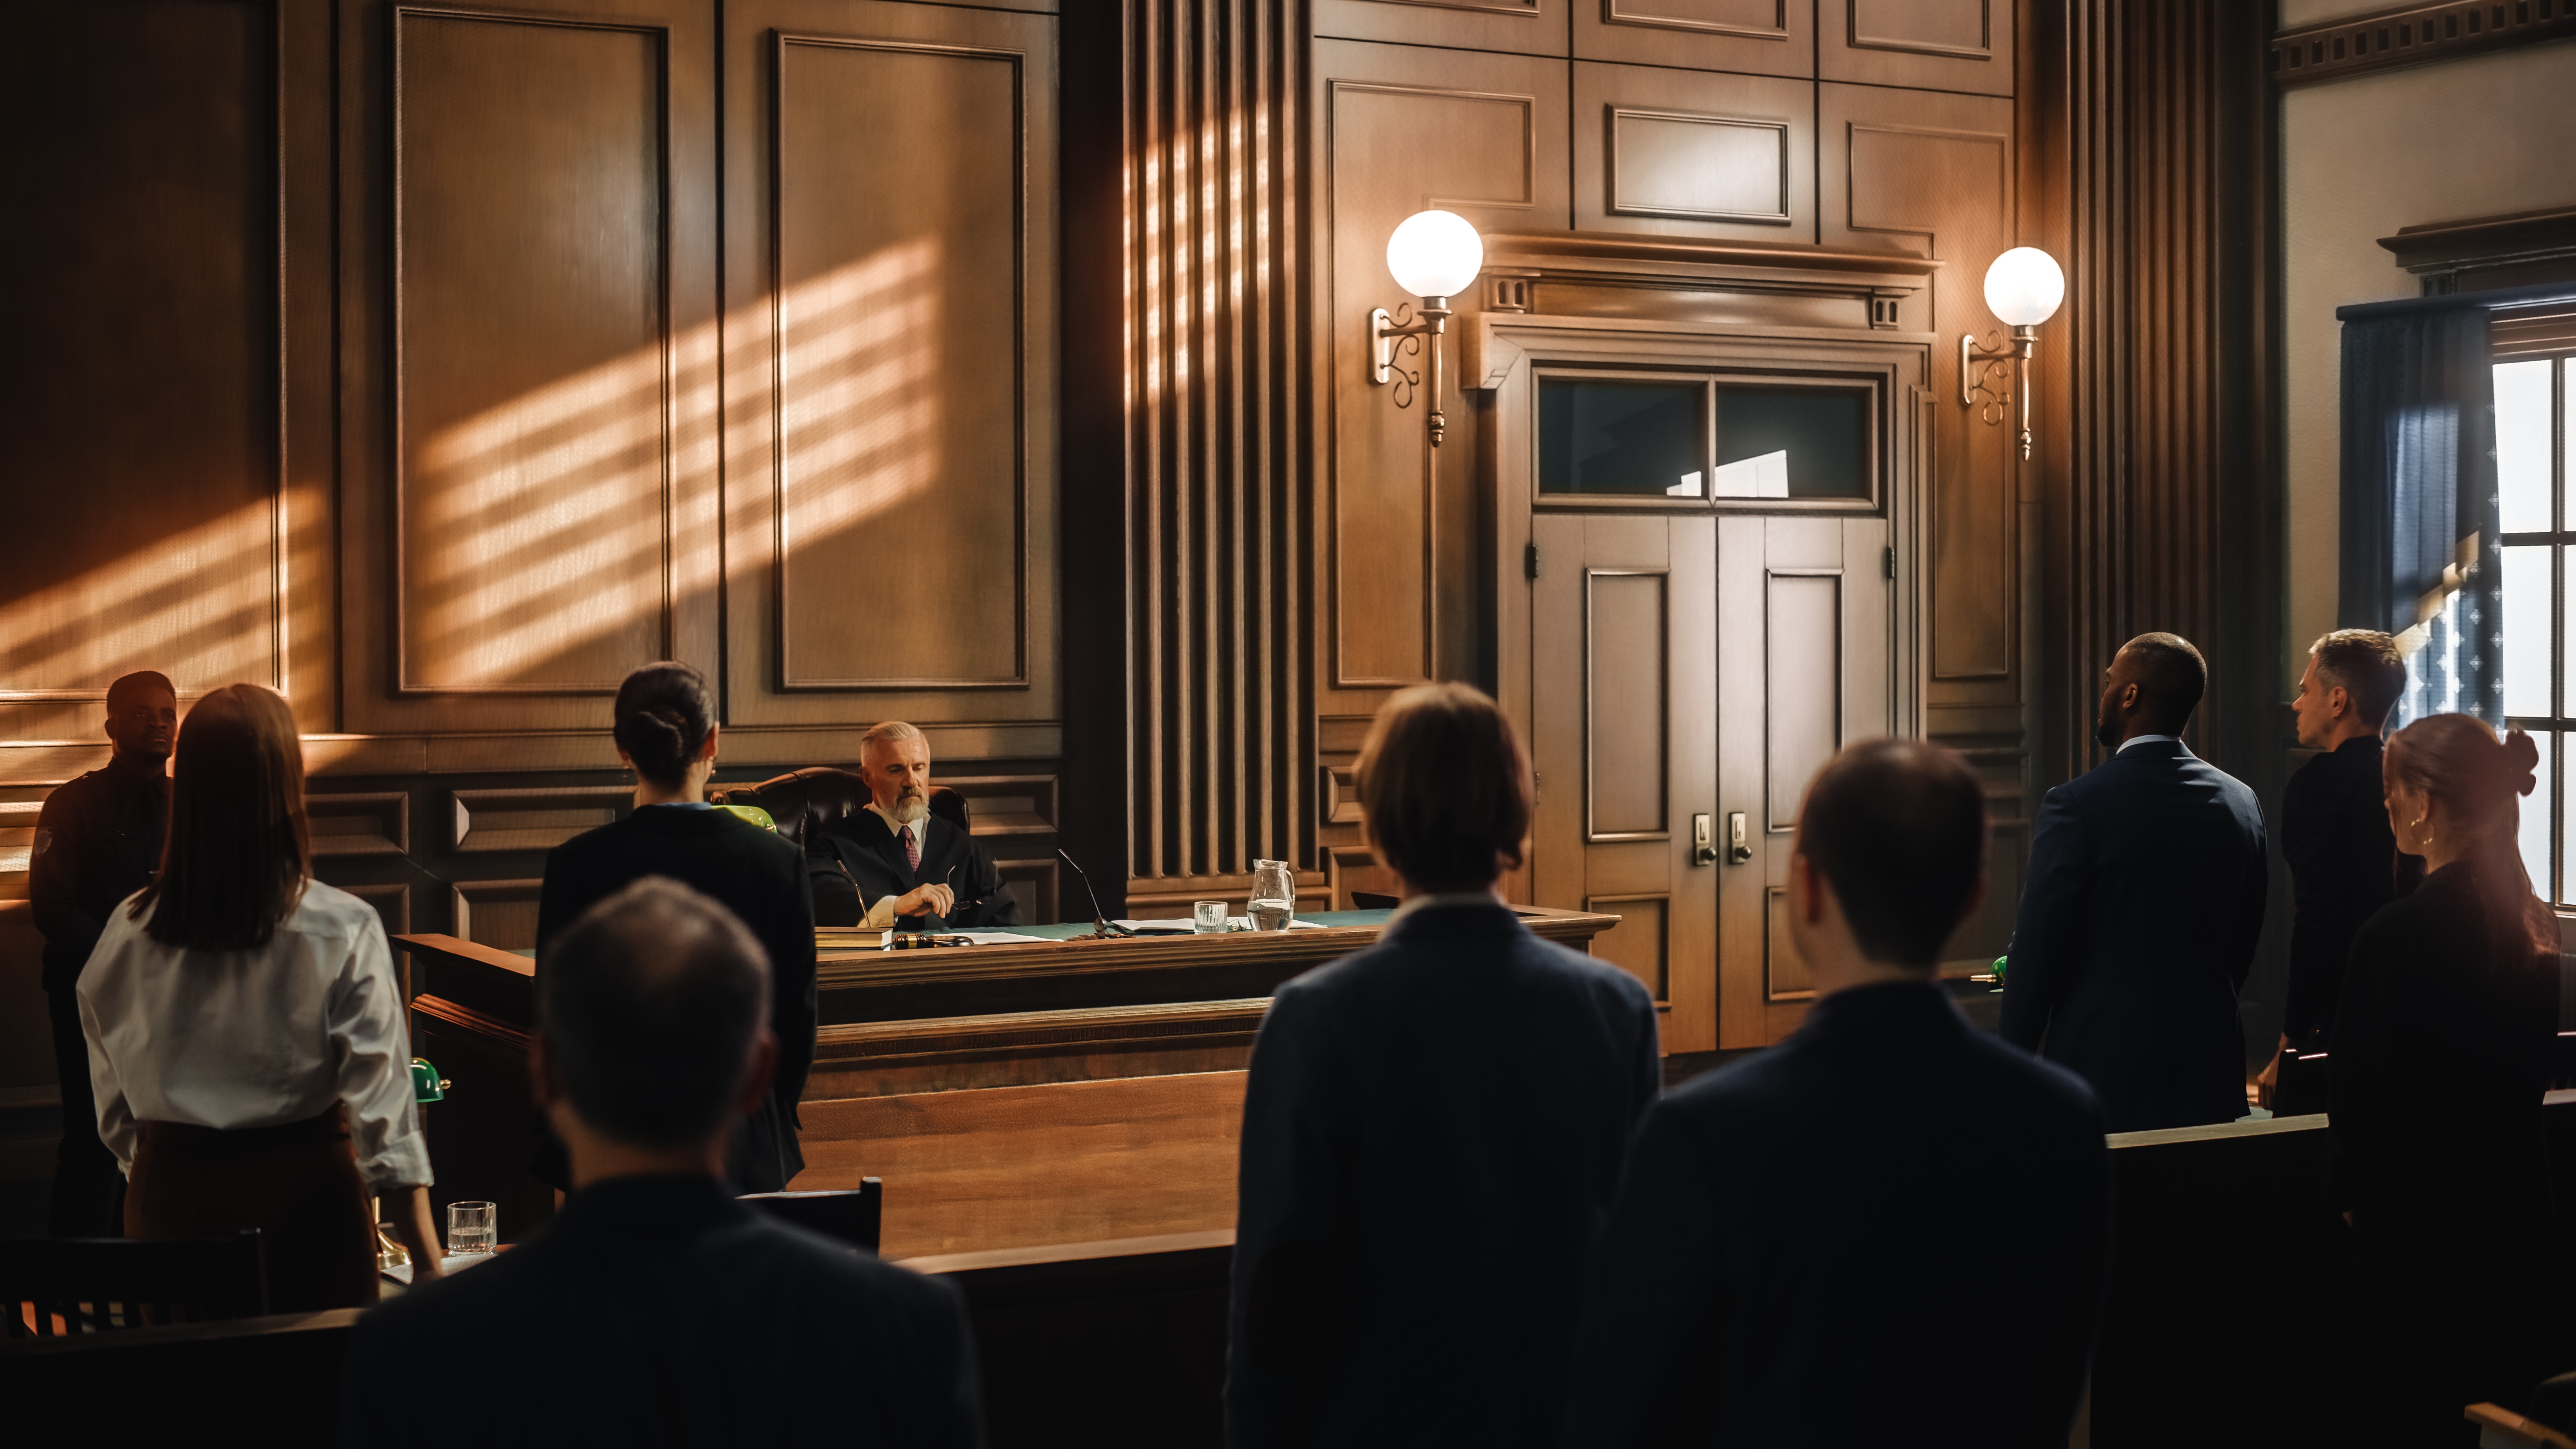 A courtroom during a case hearing | Source: Shutterstock